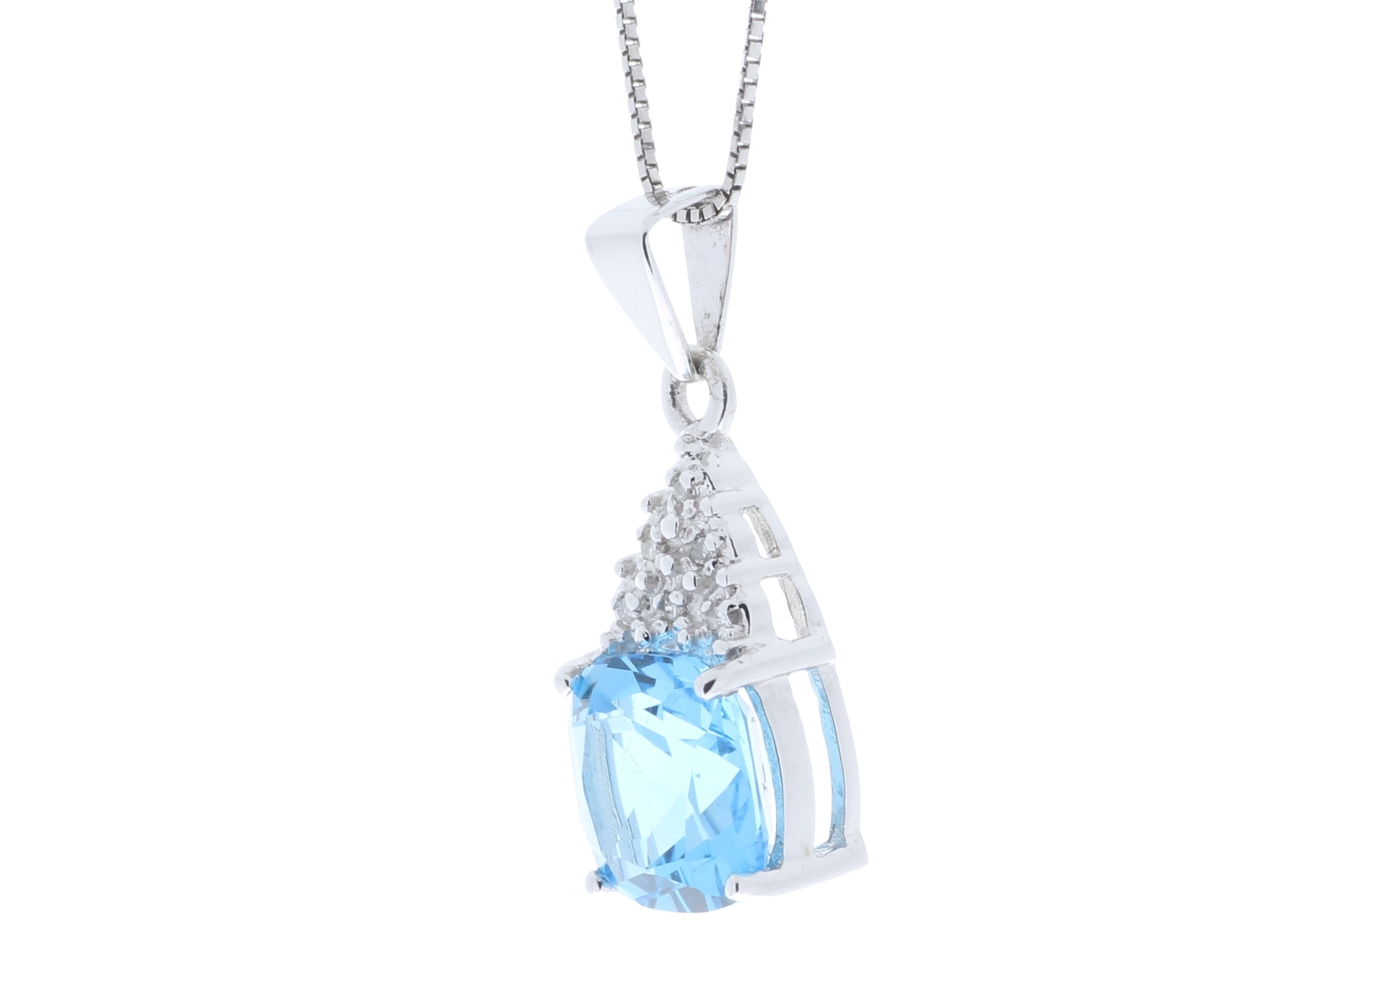 9ct White Gold Diamond And Blue Topaz Pendant 0.02 Carats - Image 4 of 6